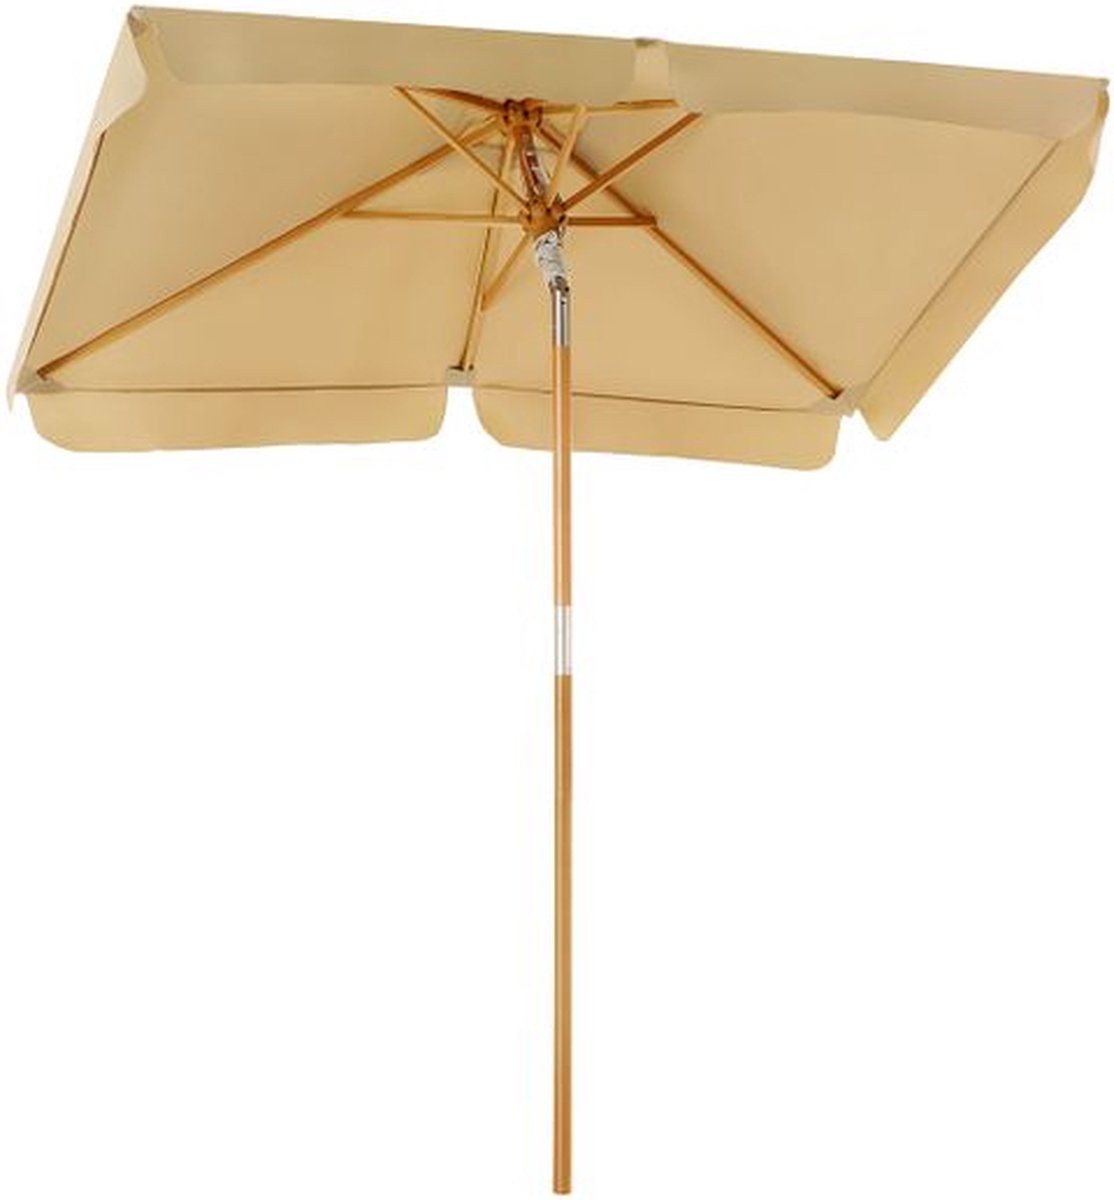 IN.HOMEXL Lissy Parasol – UV bescherming – 200 x 125 cm - Waterdicht - Tuin of Strand - inclusief opberghoes - Taupe